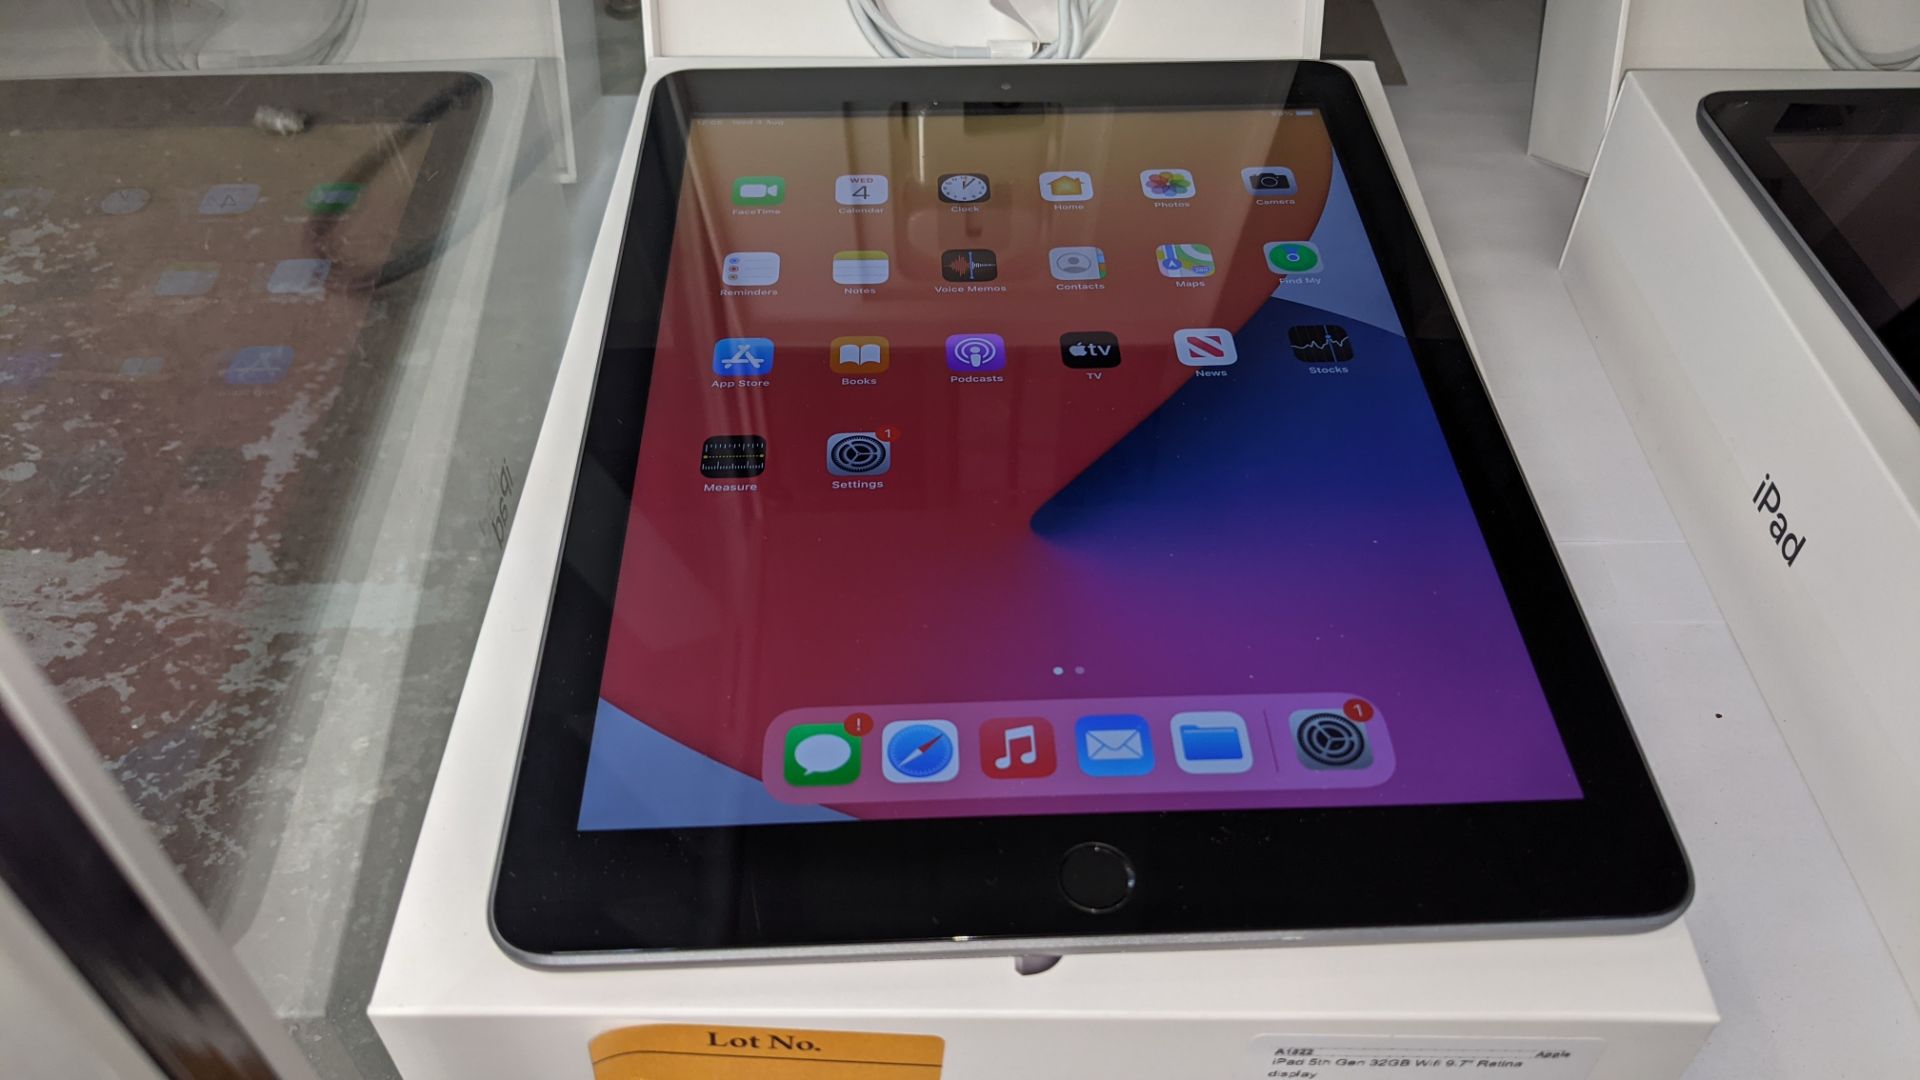 Apple iPad (space grey) 5th generation 32Gb Wi-Fi 9.7" Retina screen. Product code A1822. Apple A9 - Image 5 of 9